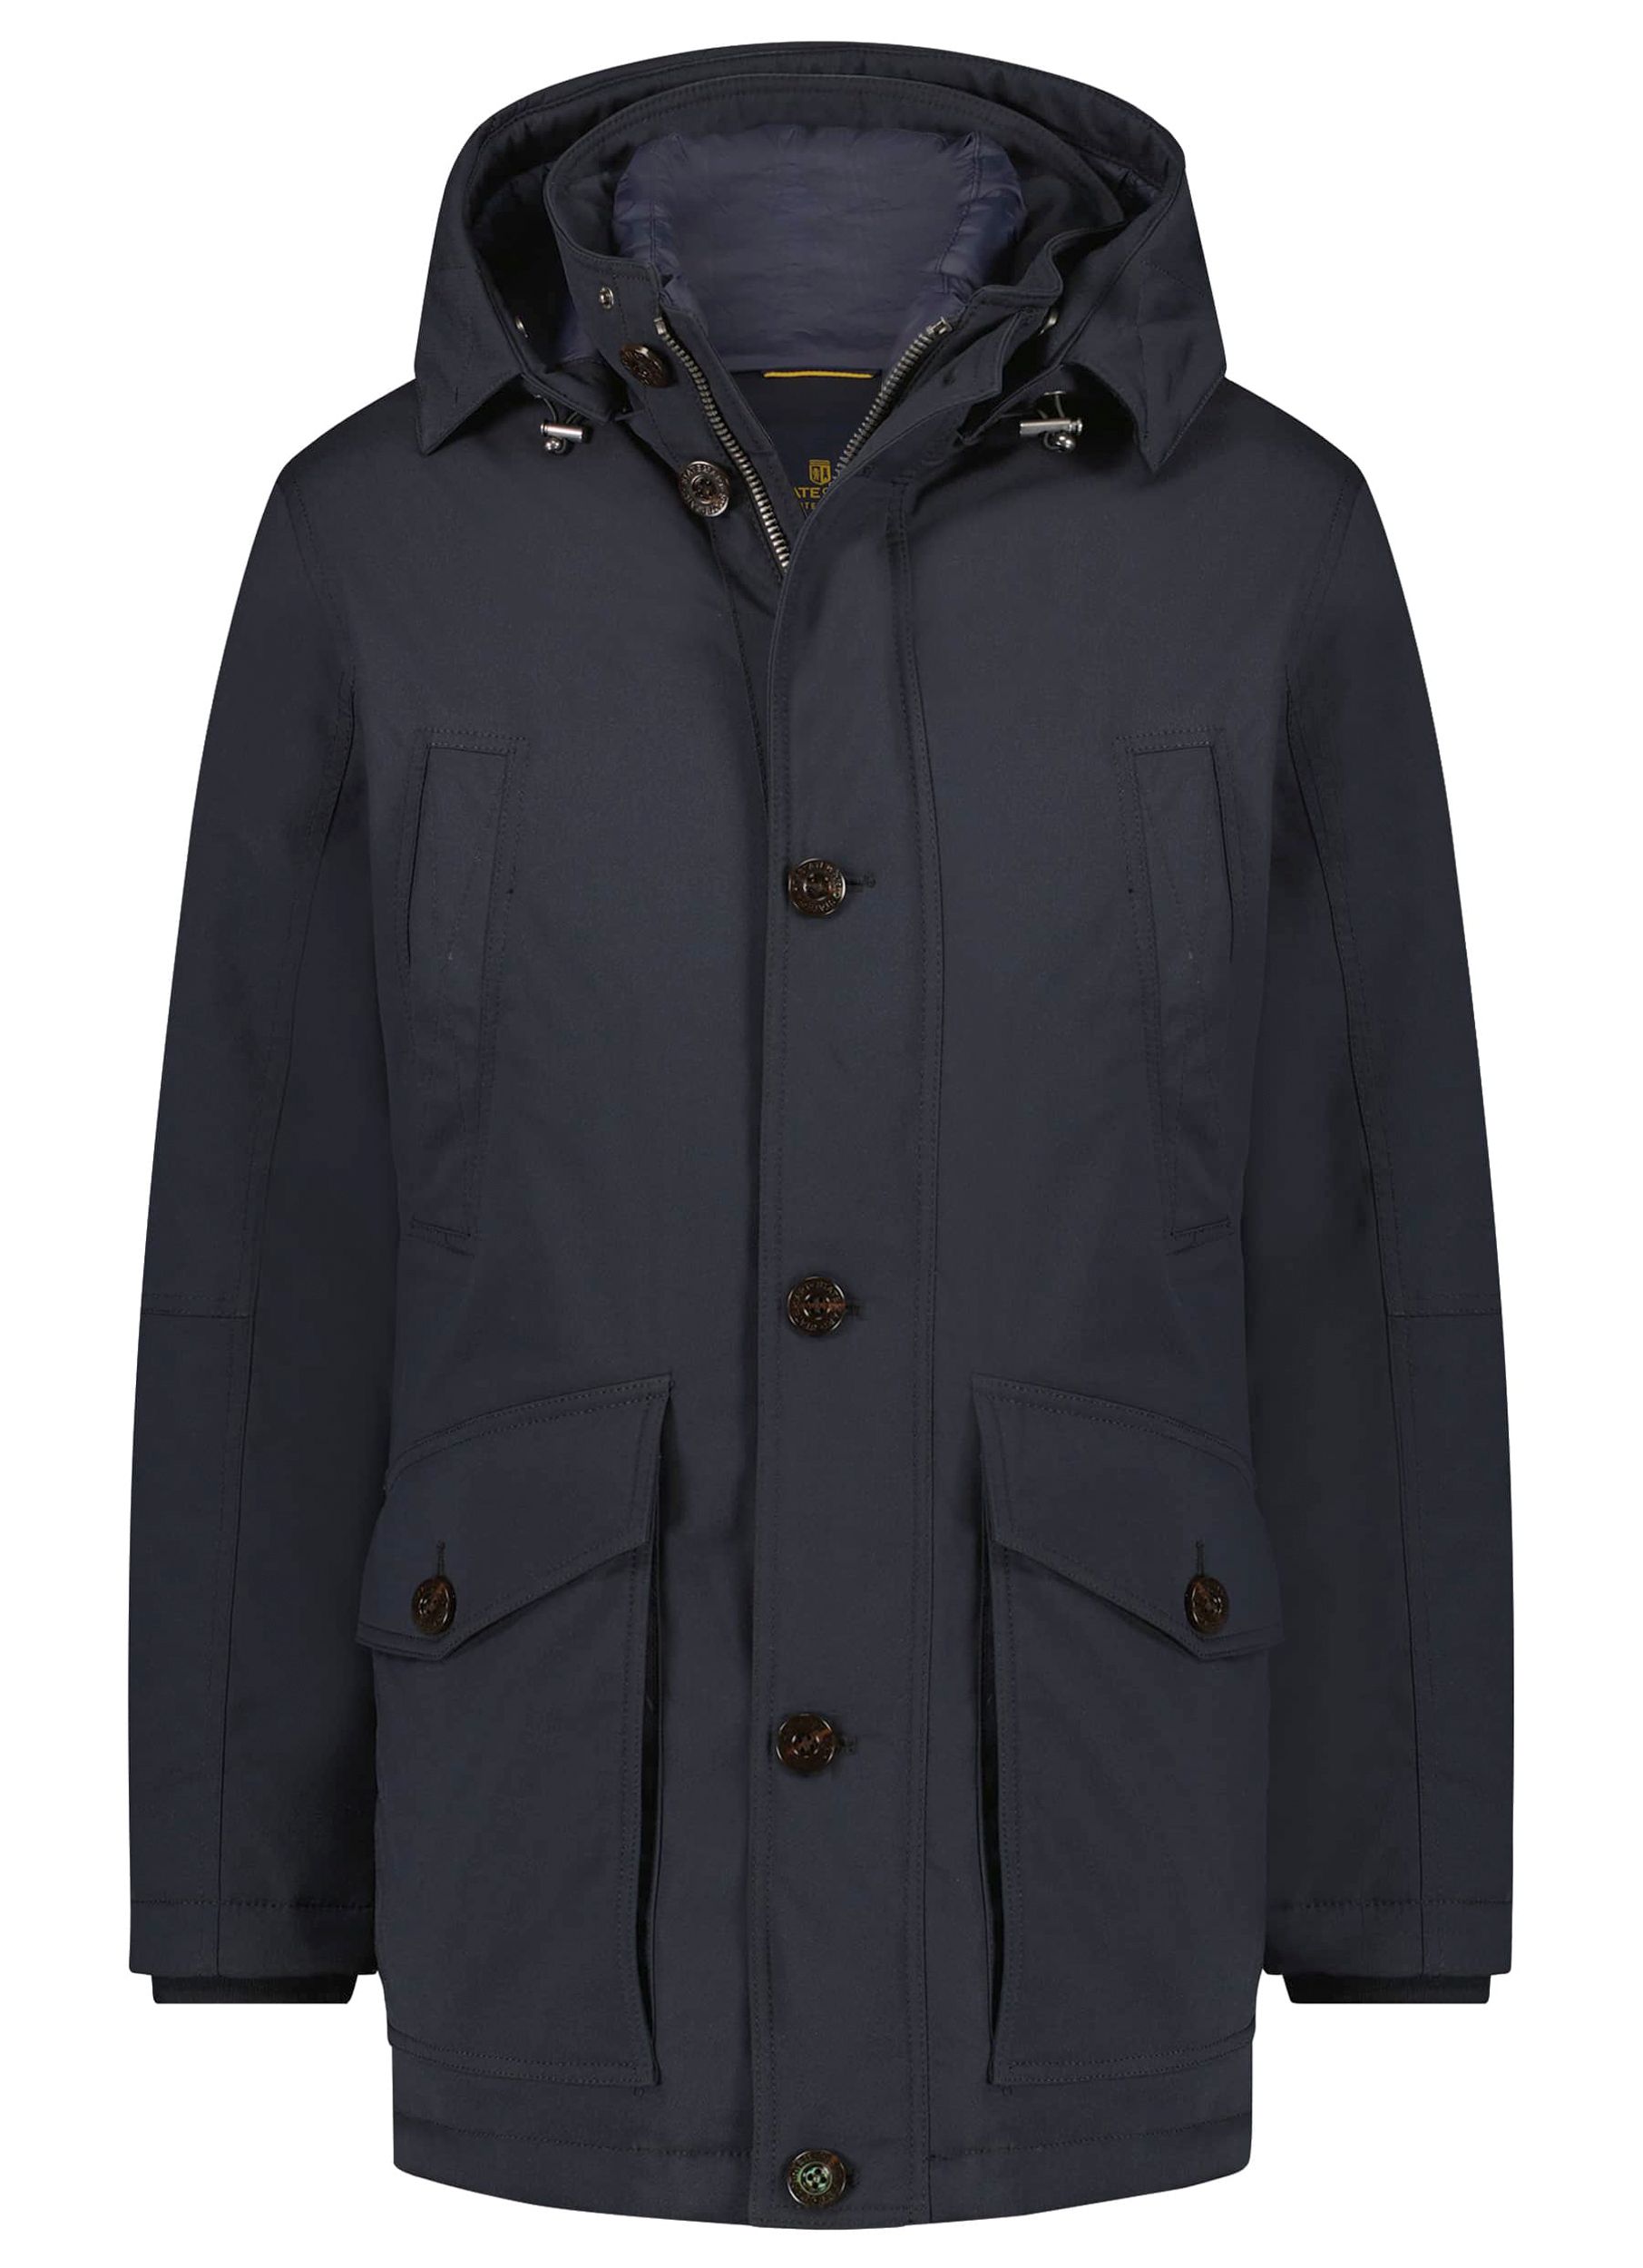 State of Art Parka Donker blauw 081116-001-4XL